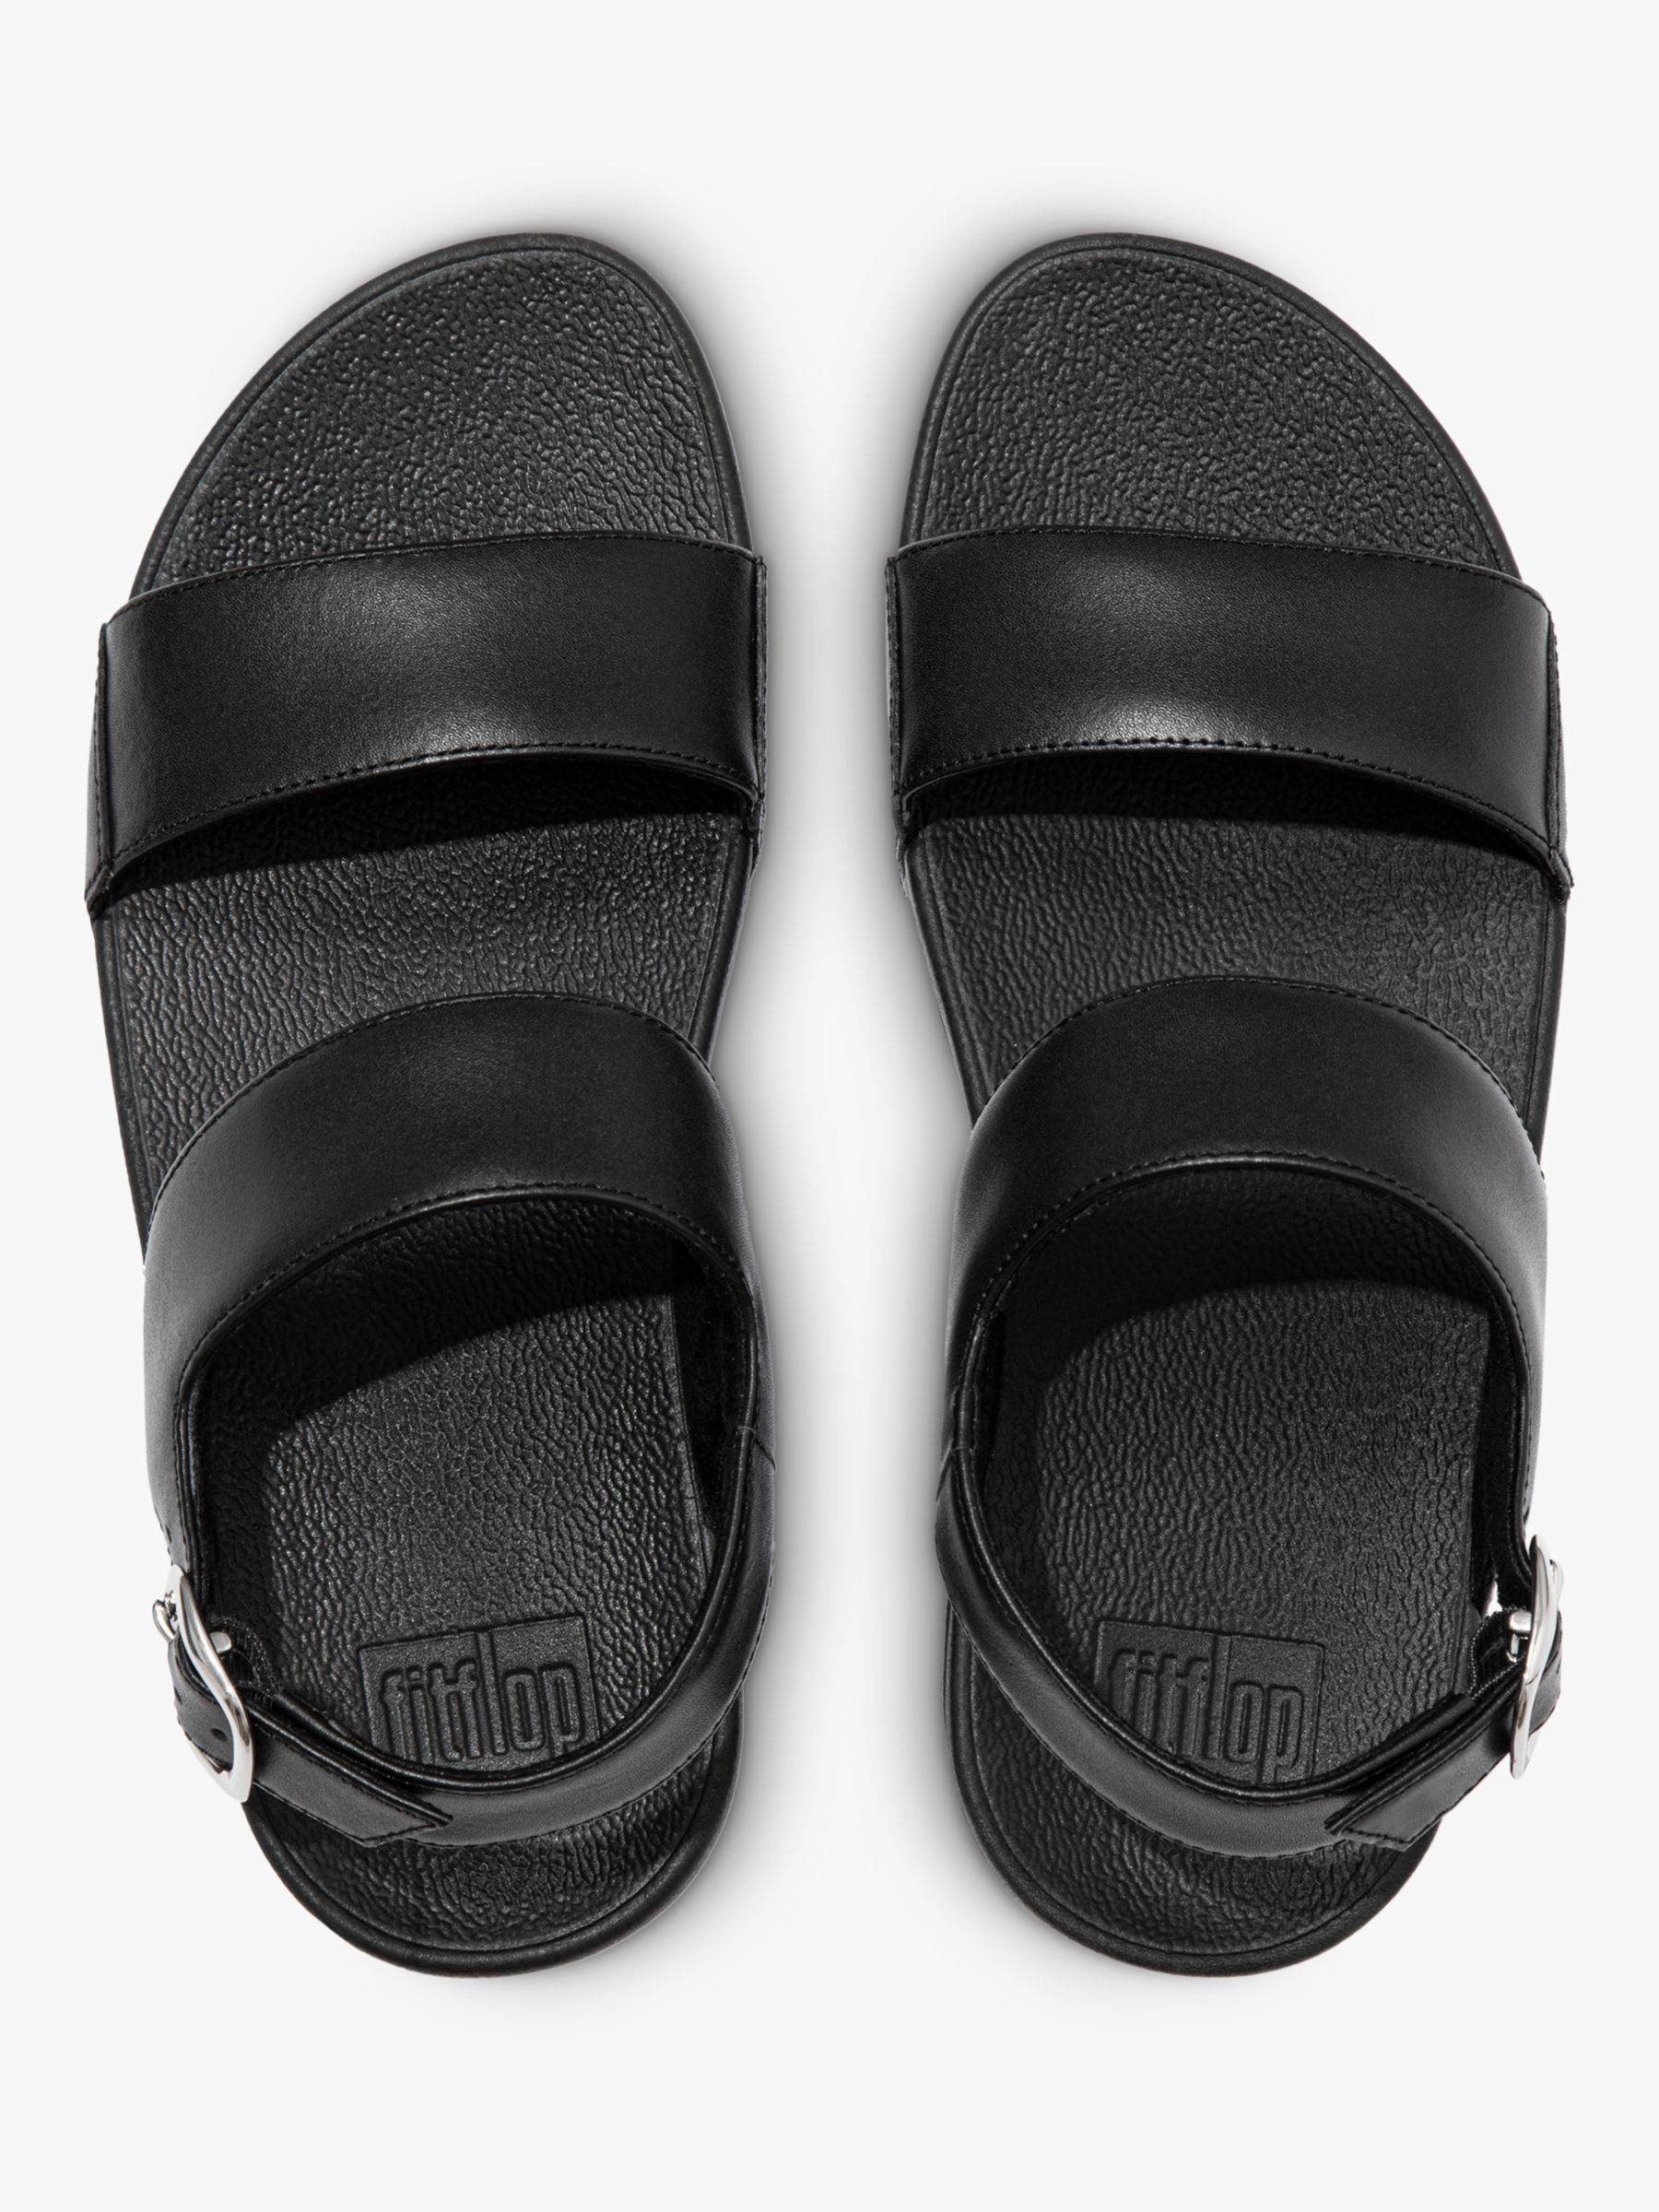 FitFlop Lulu Leather Wedge Heel Sandals, All Black at John Lewis & Partners